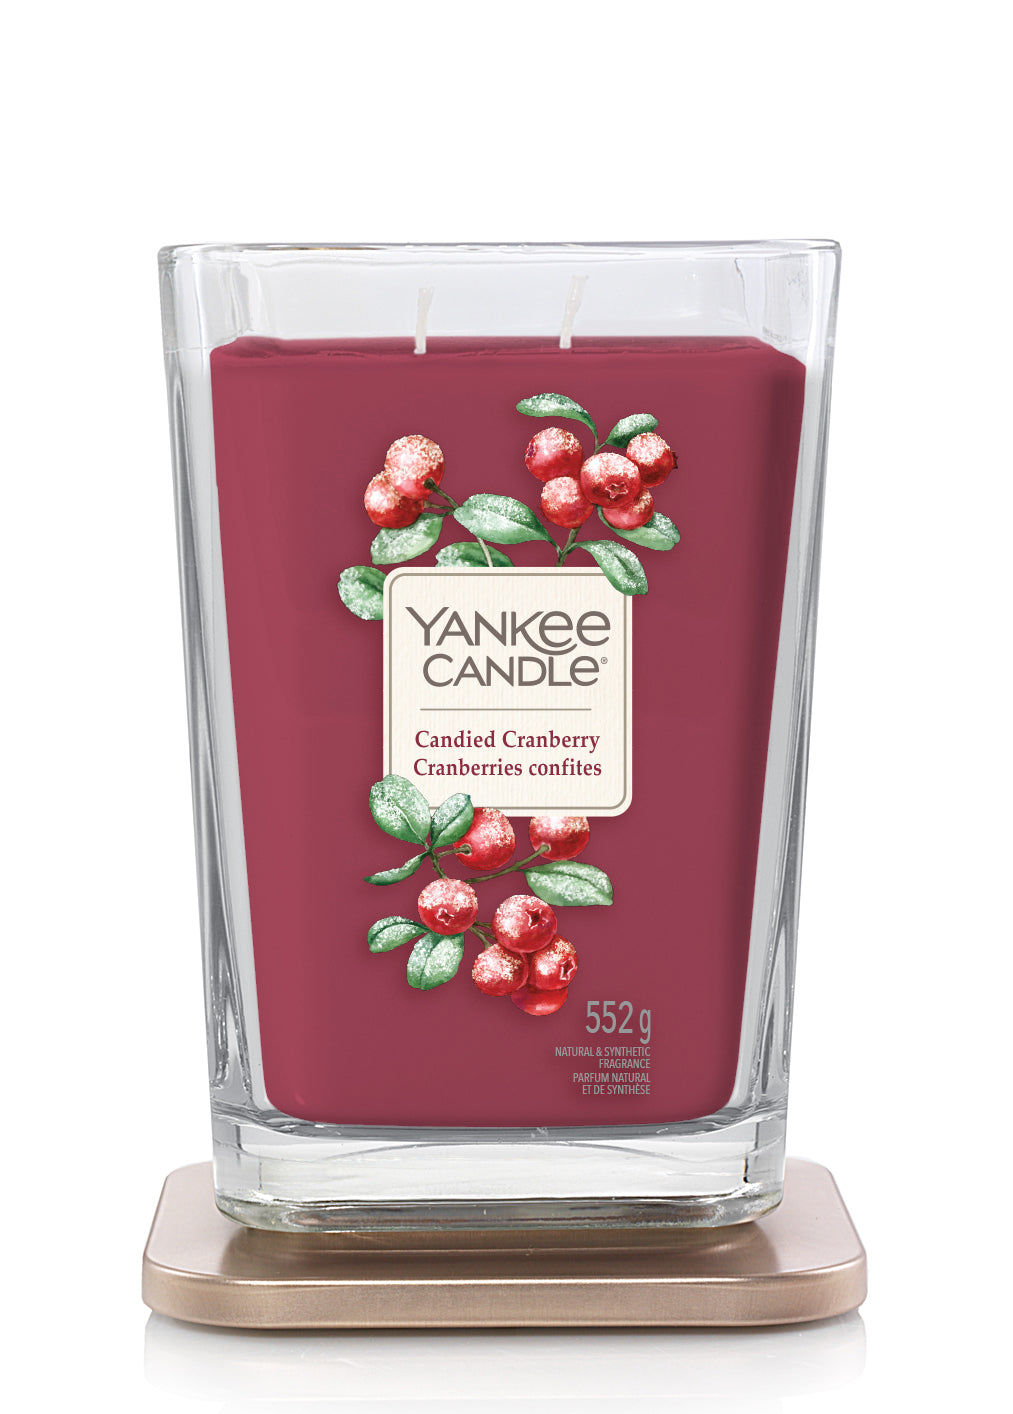 CANDIED CRANBERRY -Yankee Candle- Candela Grande